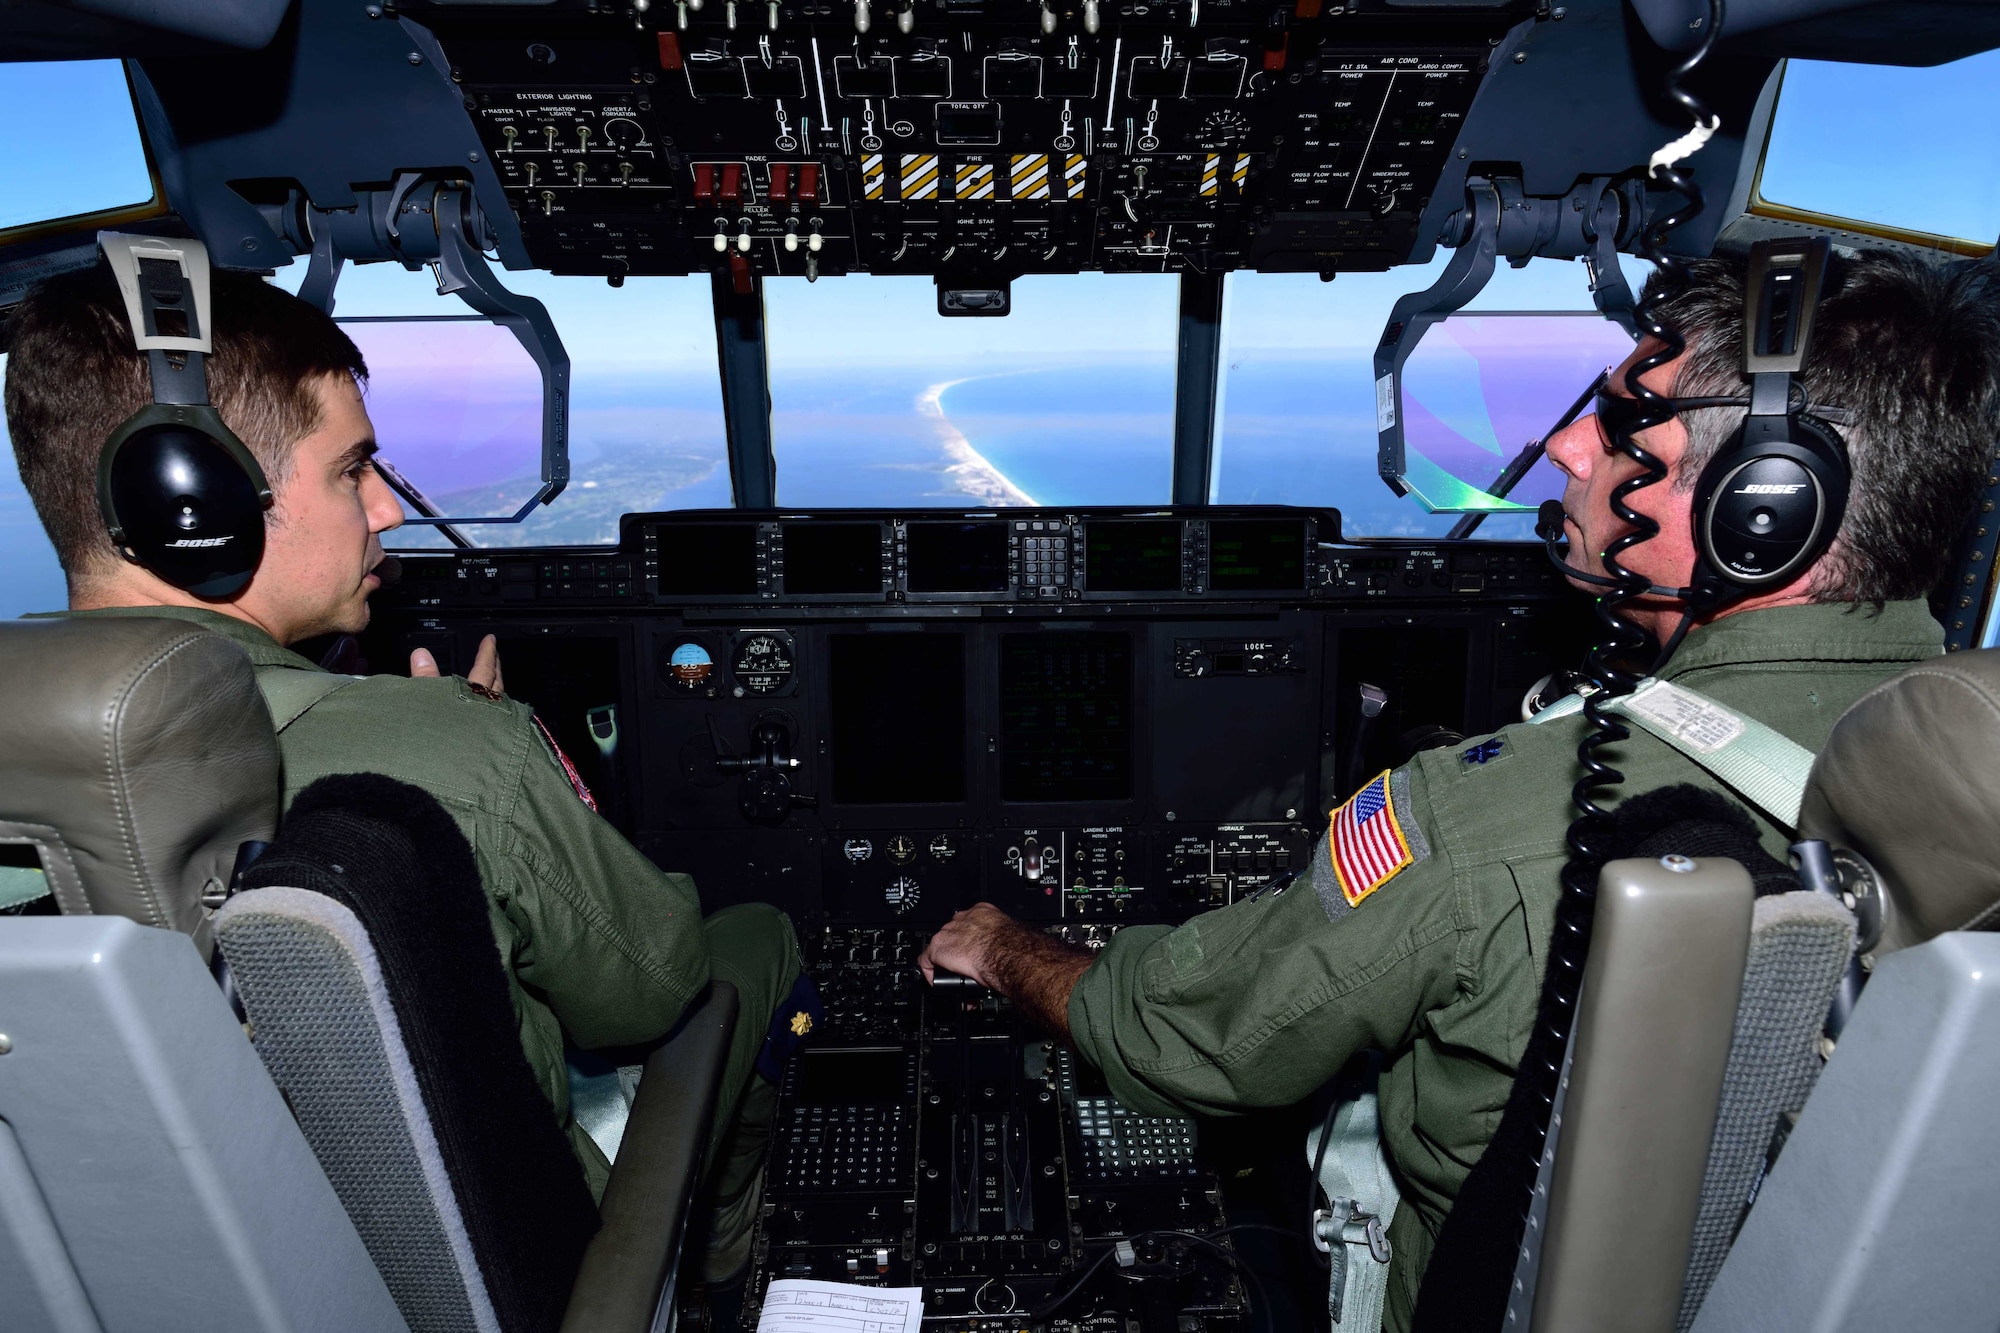 Lt. Col. Scot Salminen (right) and Maj. Kevin Olsen, 815th Airlift Squadron pilots, discuss the flight path of their C-130J Super Hercules aircraft March 2 during Emerald Warrior 2018. The 815th AS “Flying Jennies” provided airlift support for the special operations joint training event at Hurlburt Field, Florida, Feb. 26-March 2. The exercise involved units from all U.S. military branches, U.S. Special Operations Command and North Atlantic Treaty Organization partner forces. (U.S. Air Force photo by Tech. Sgt. Ryan Labadens)